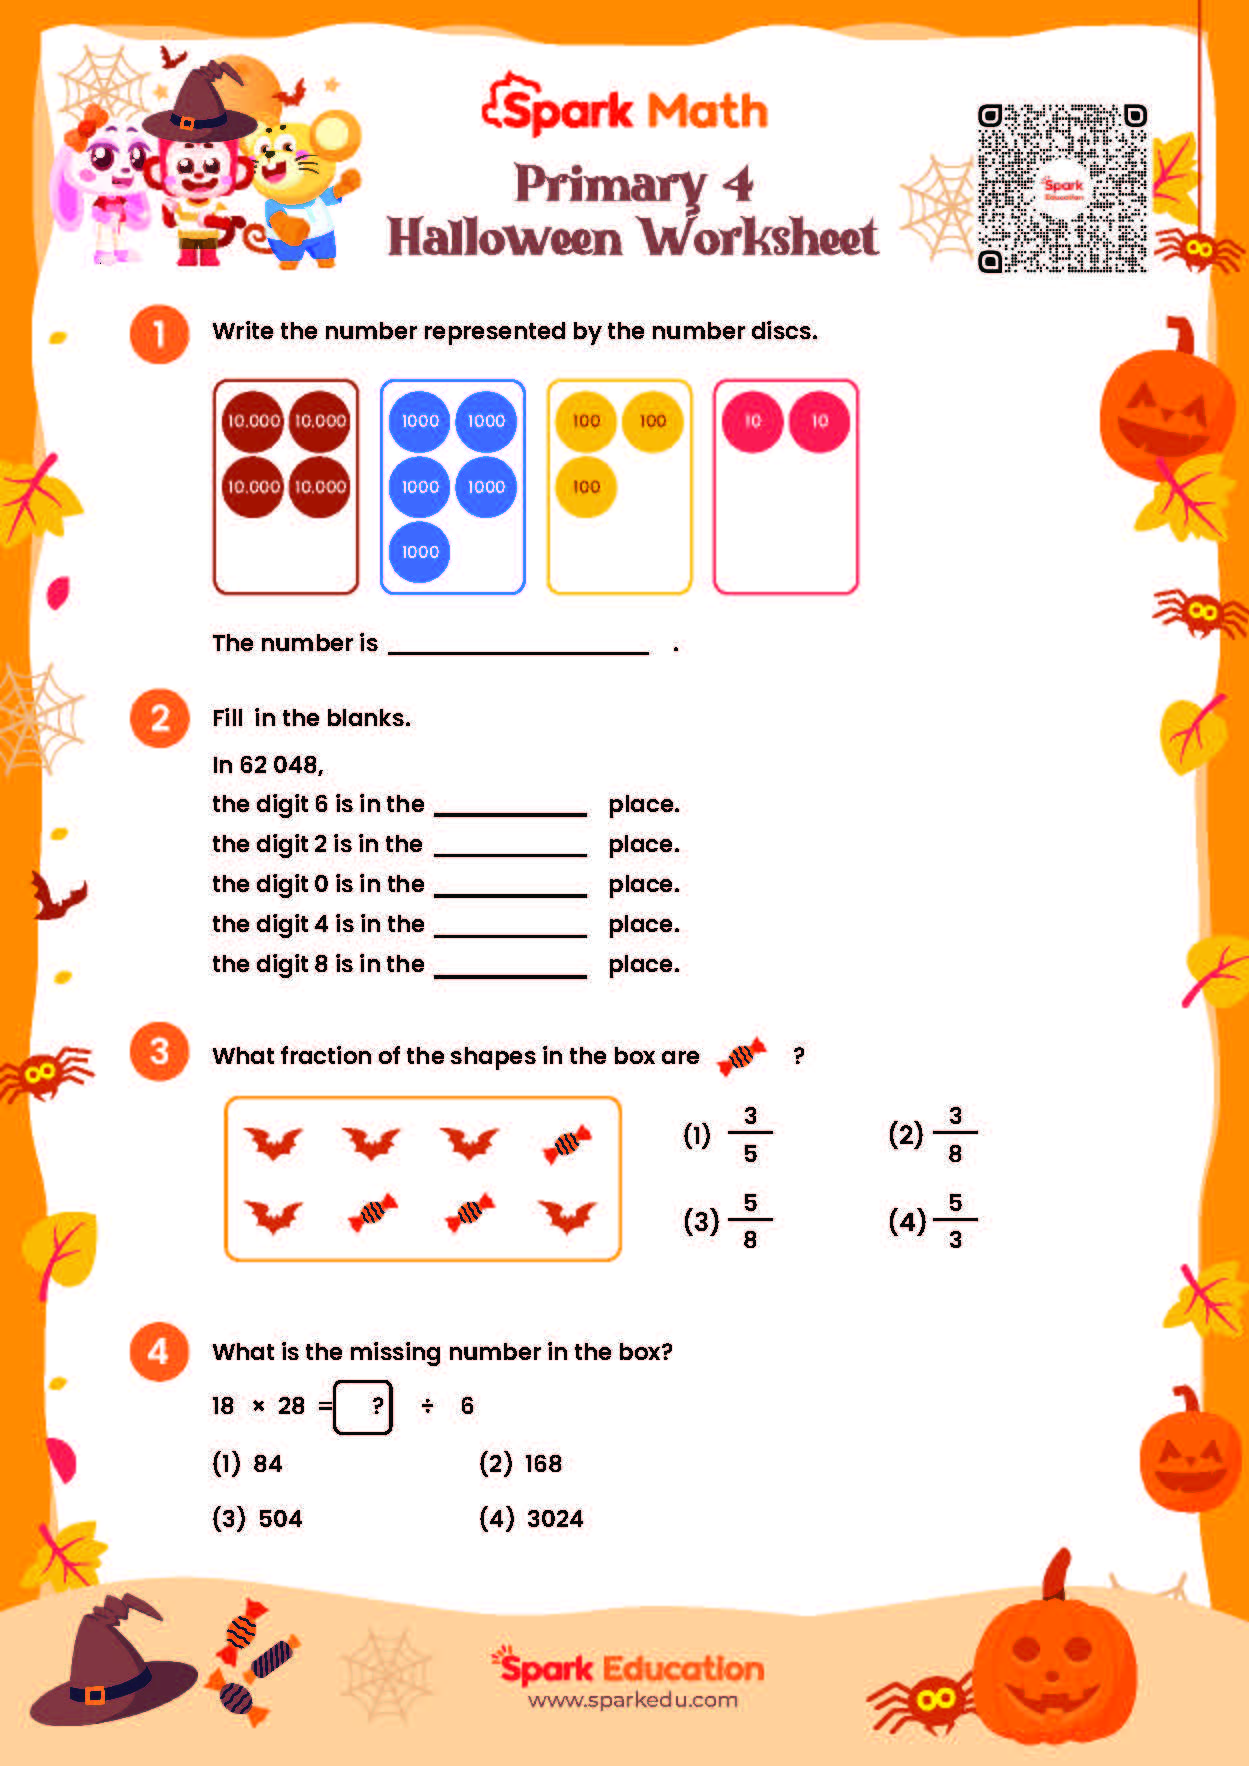 Spark Math Halloween P4 Worksheet Page 1 preview